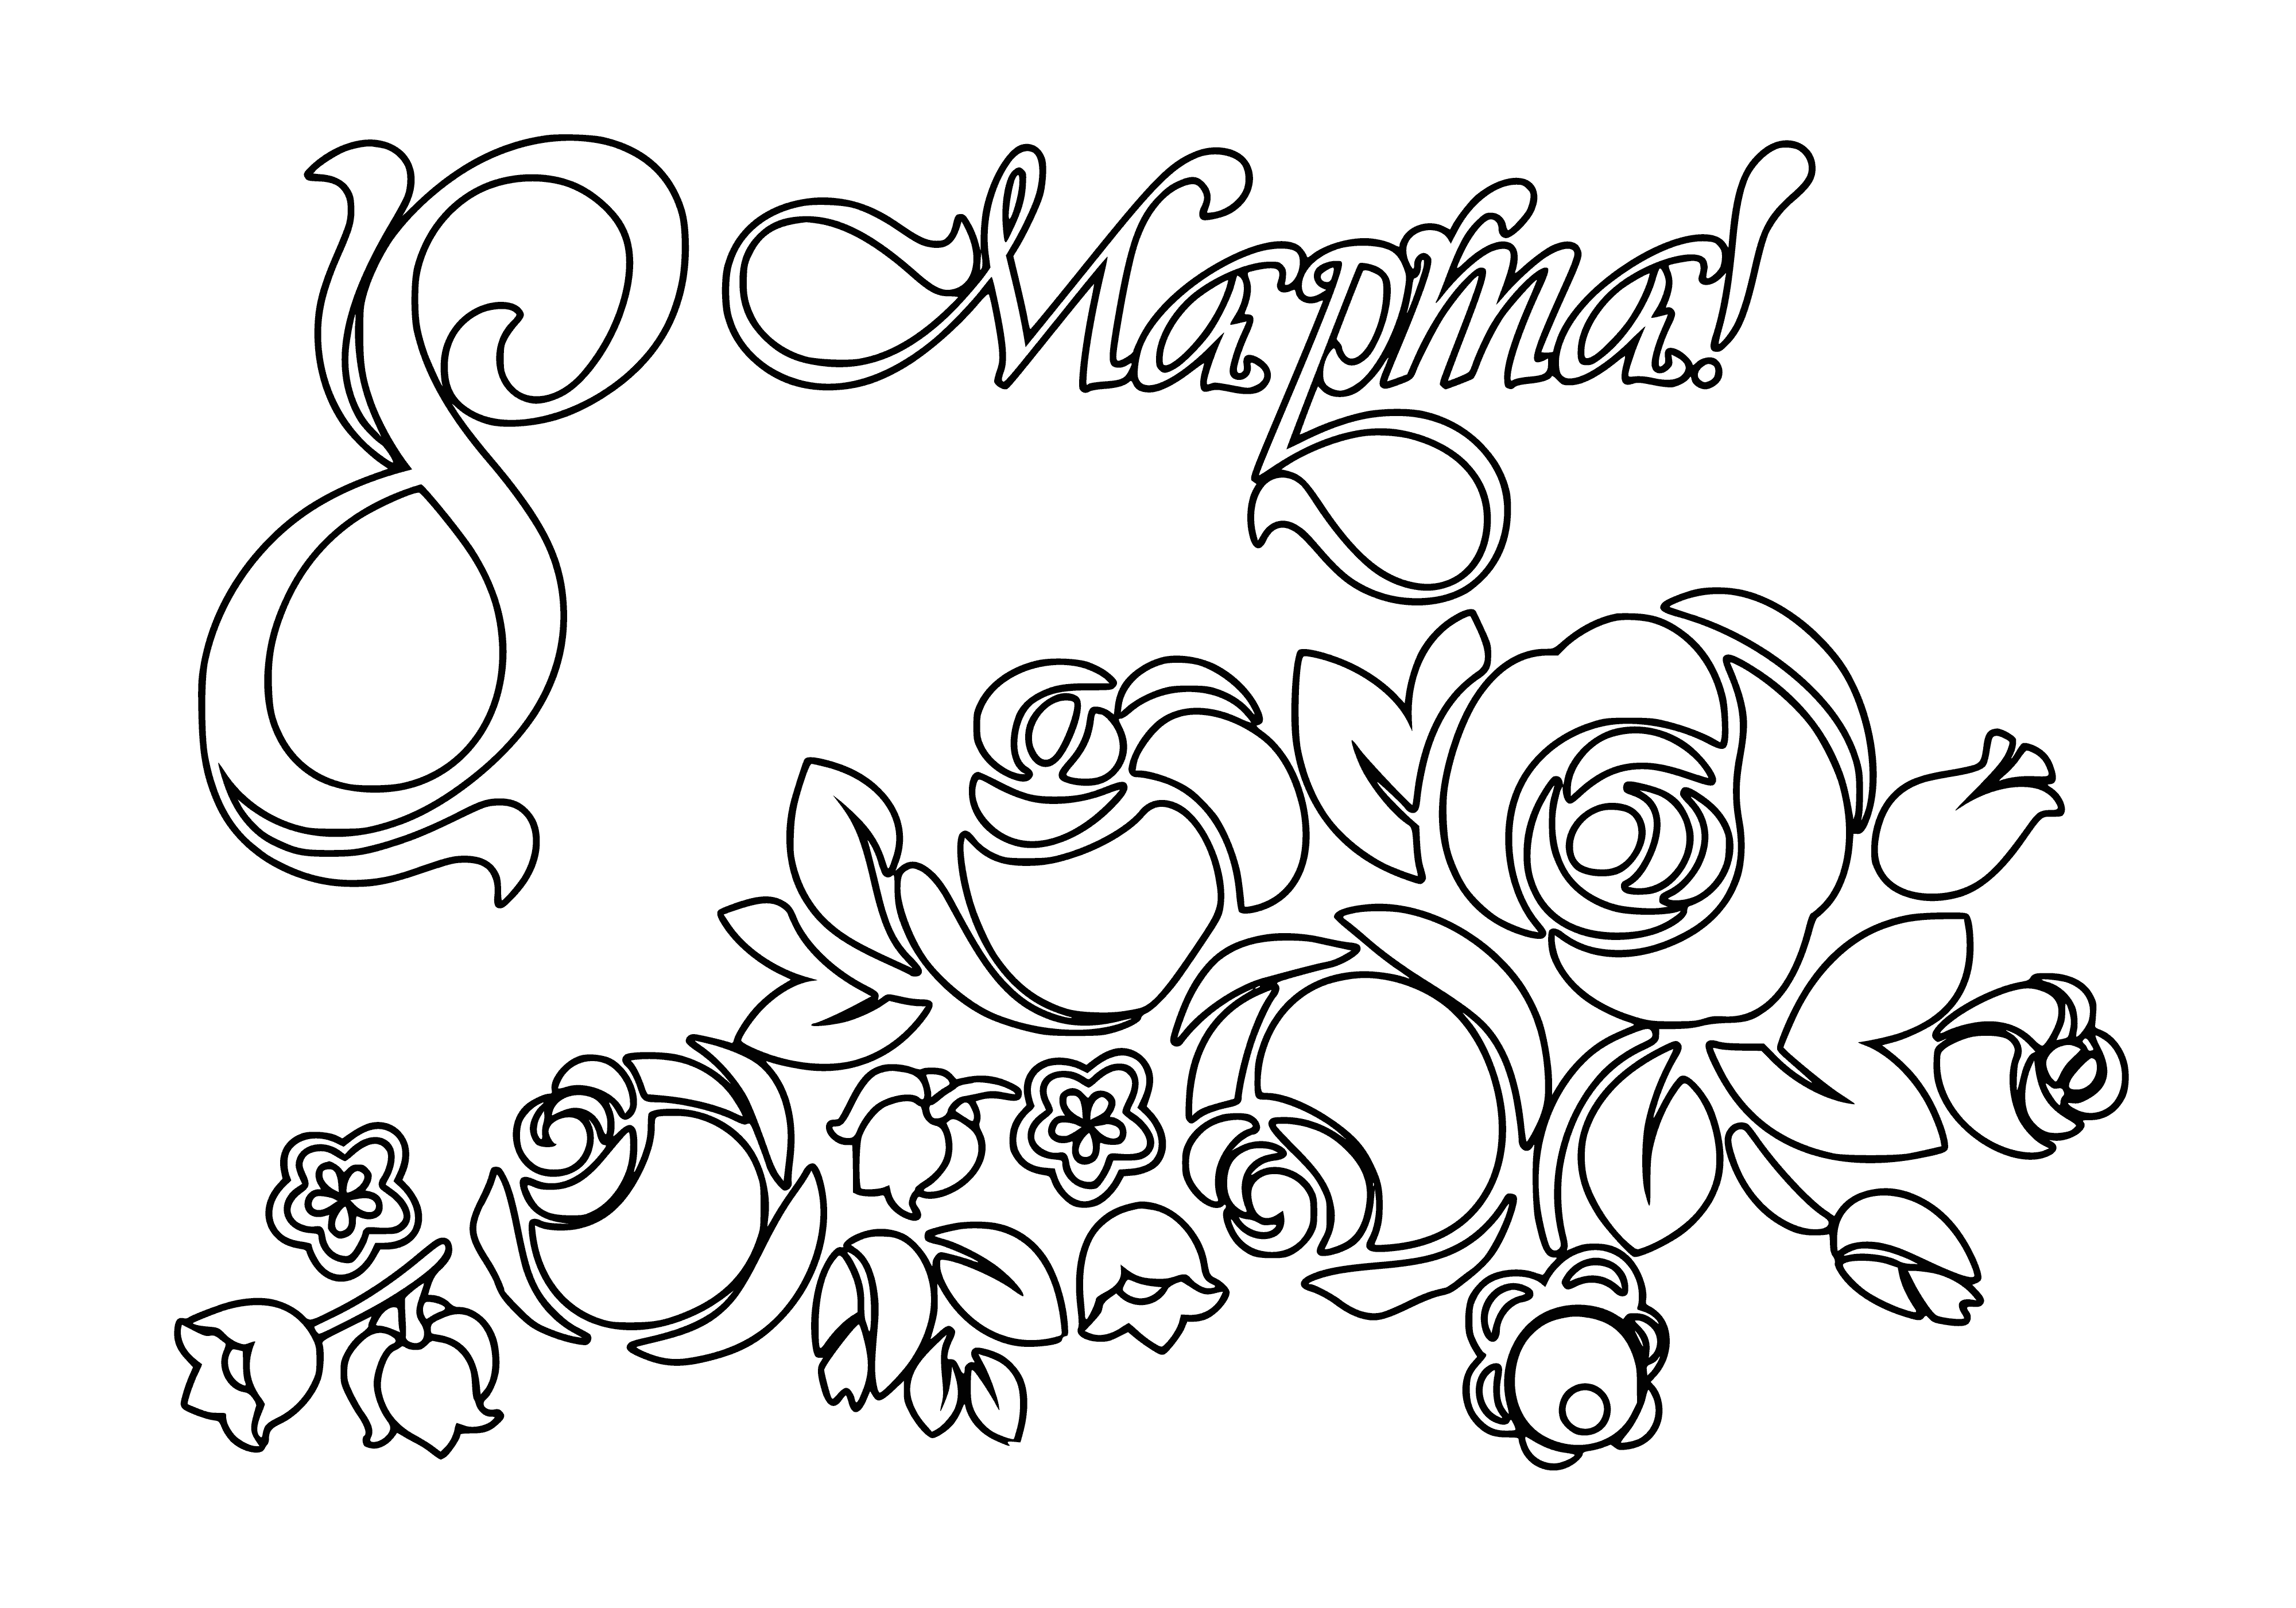 Postcard for March 8 coloring page